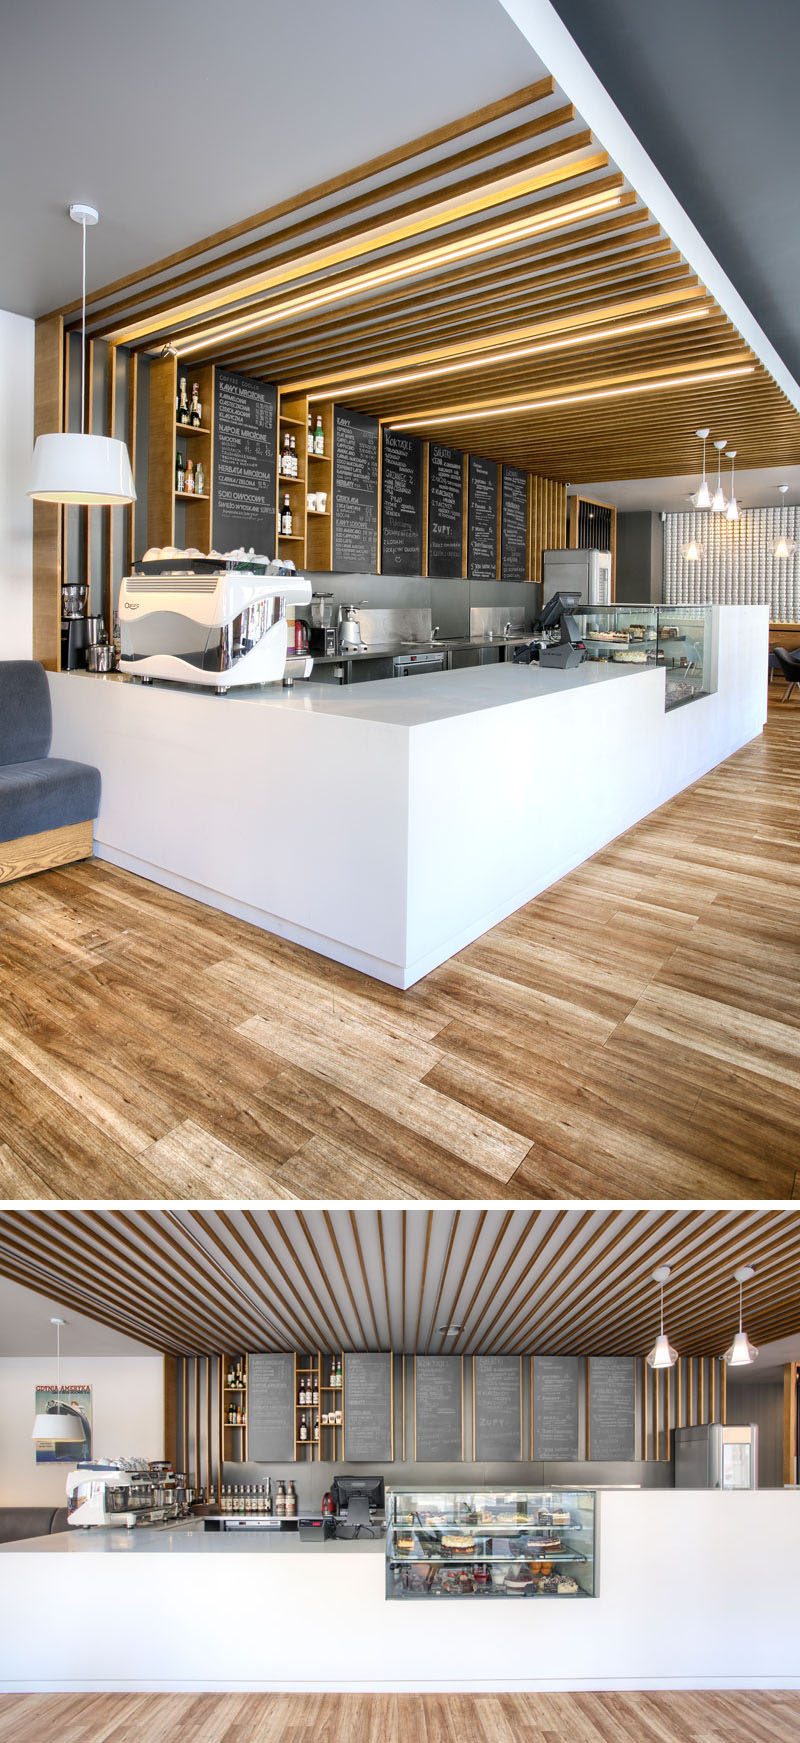 This cafe service counter mixes white counters with glass, wood detailing and chalkboards. Hidden lighting runs overhead along the the wooden details.